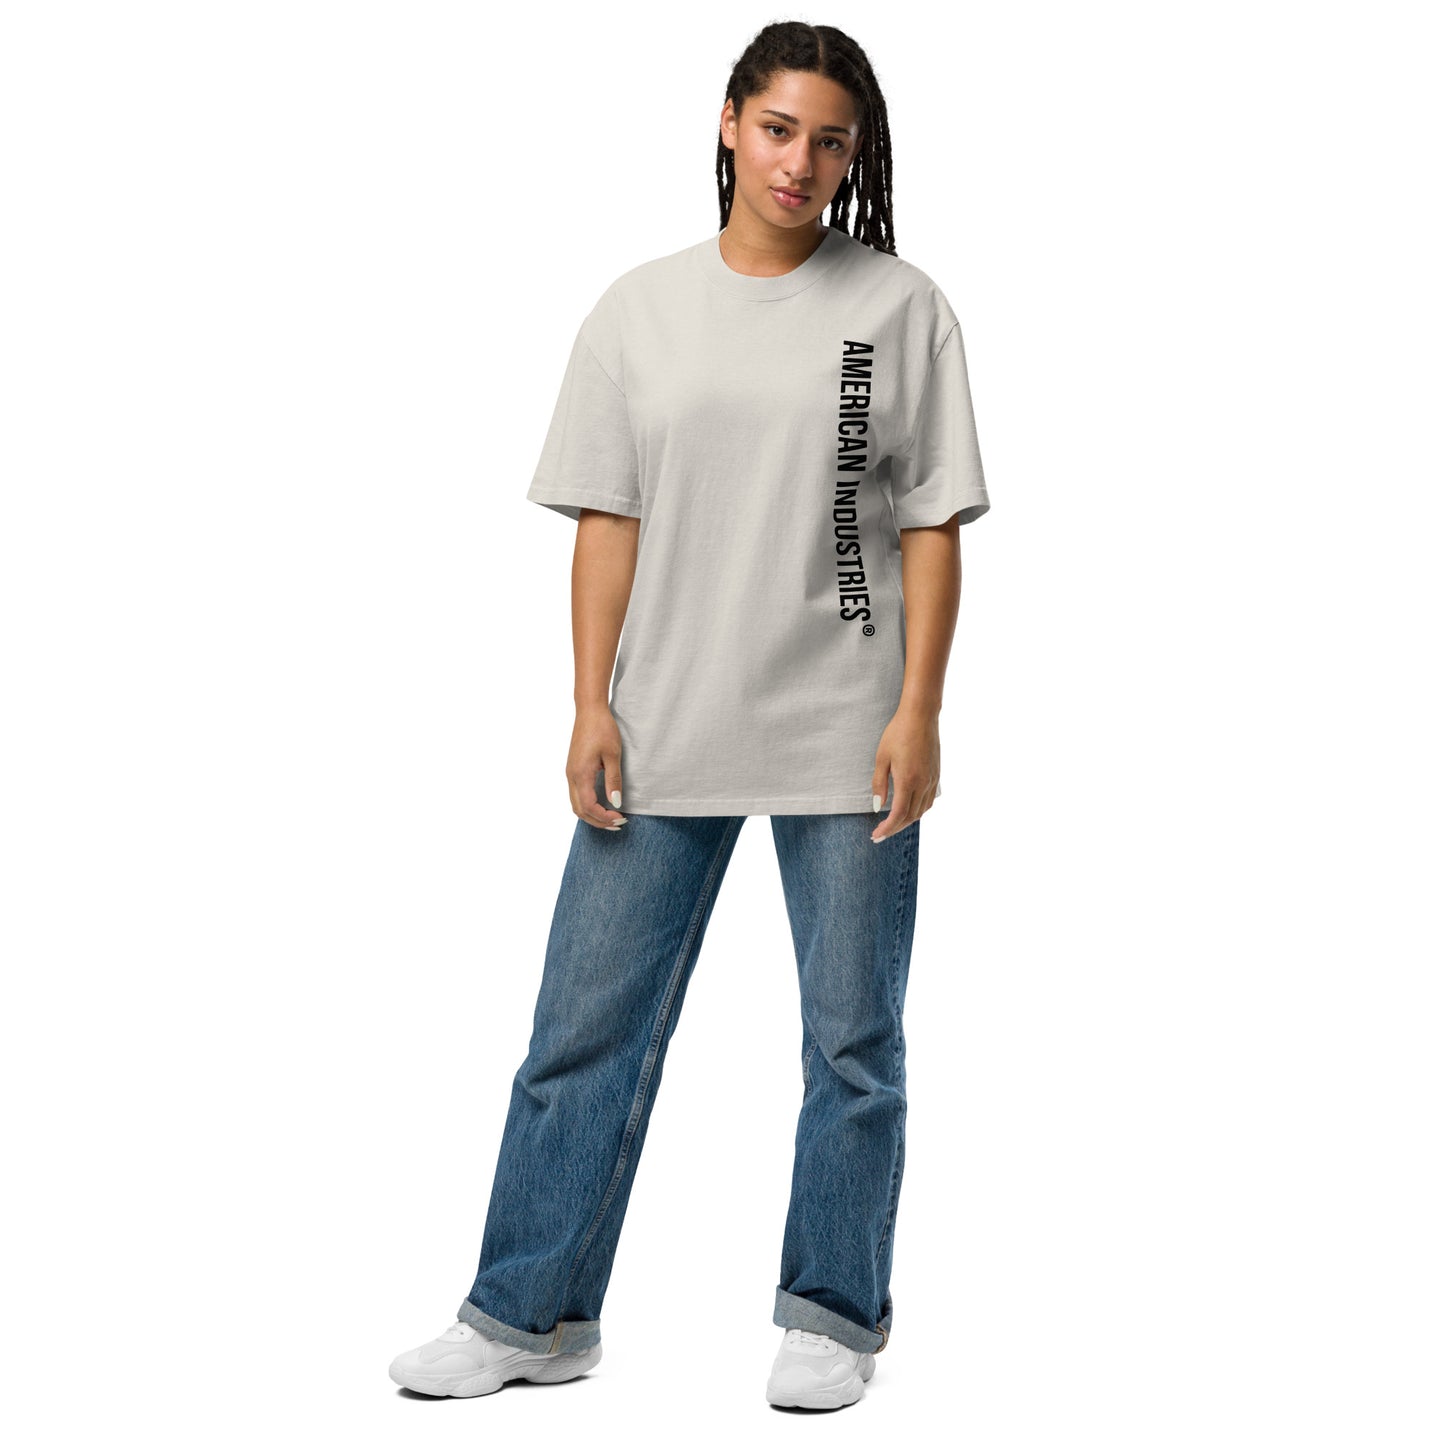 American Industries ® GAC Oversized faded t-shirt